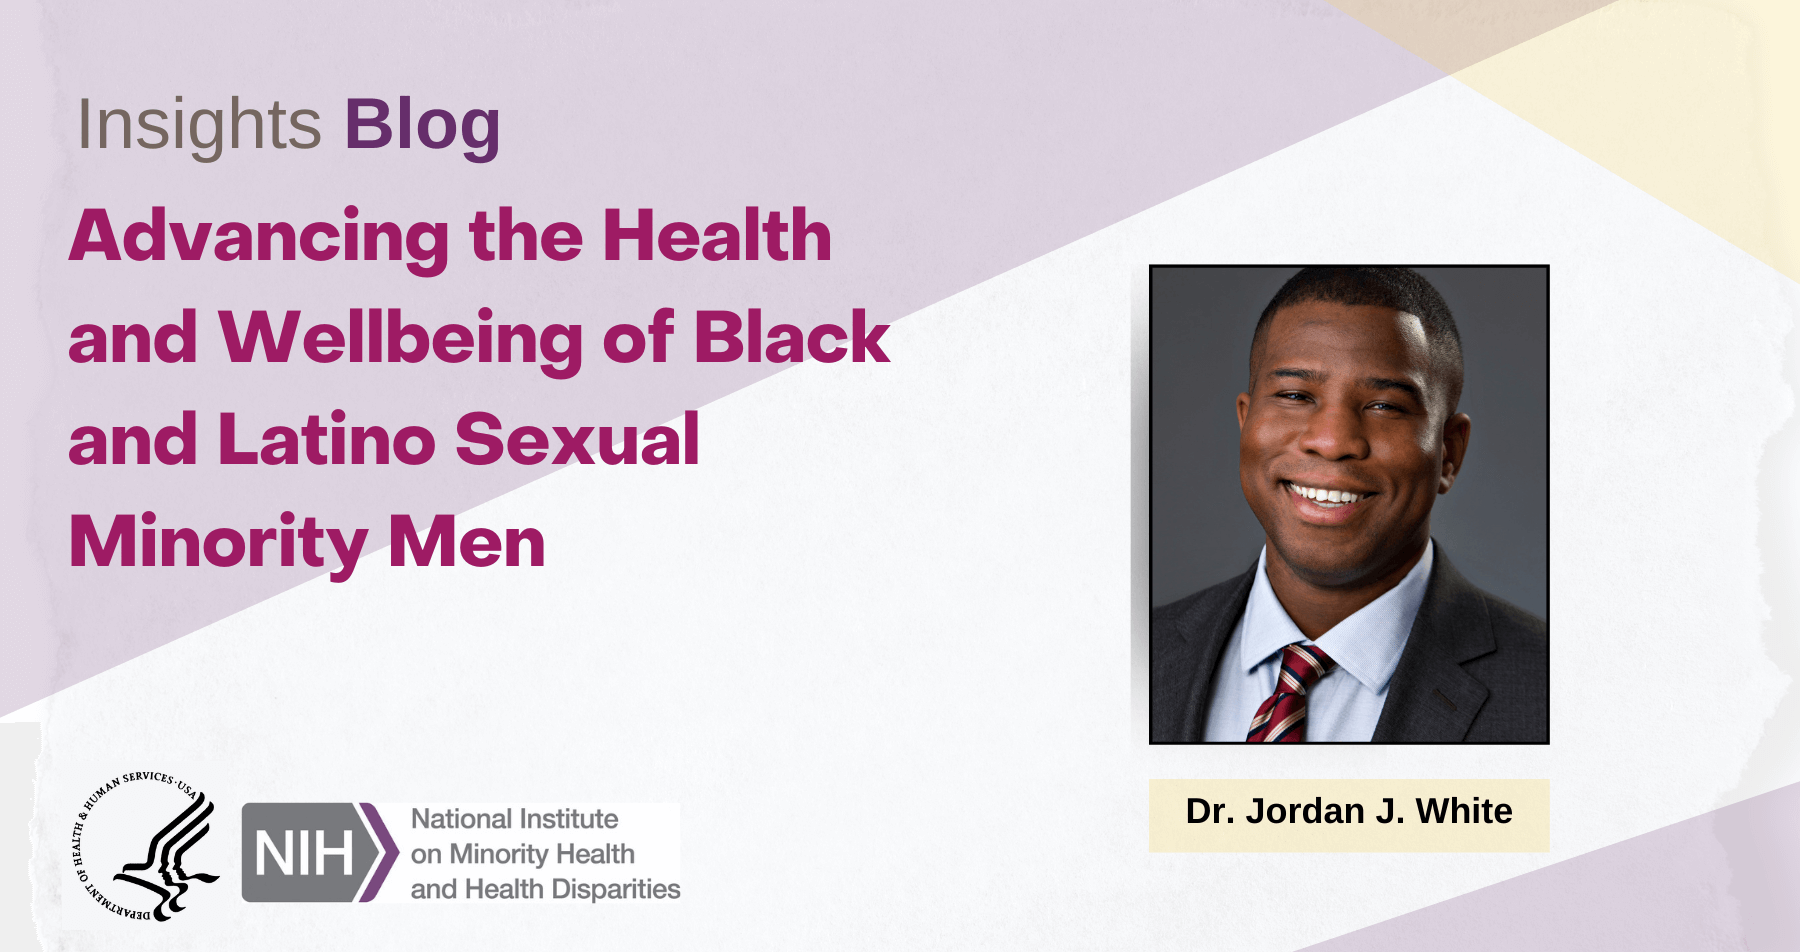 NIMHD Insights Blog: Dr. Jordan J. White on advancing the health and wellbeing of Black and Latino sexual minority men